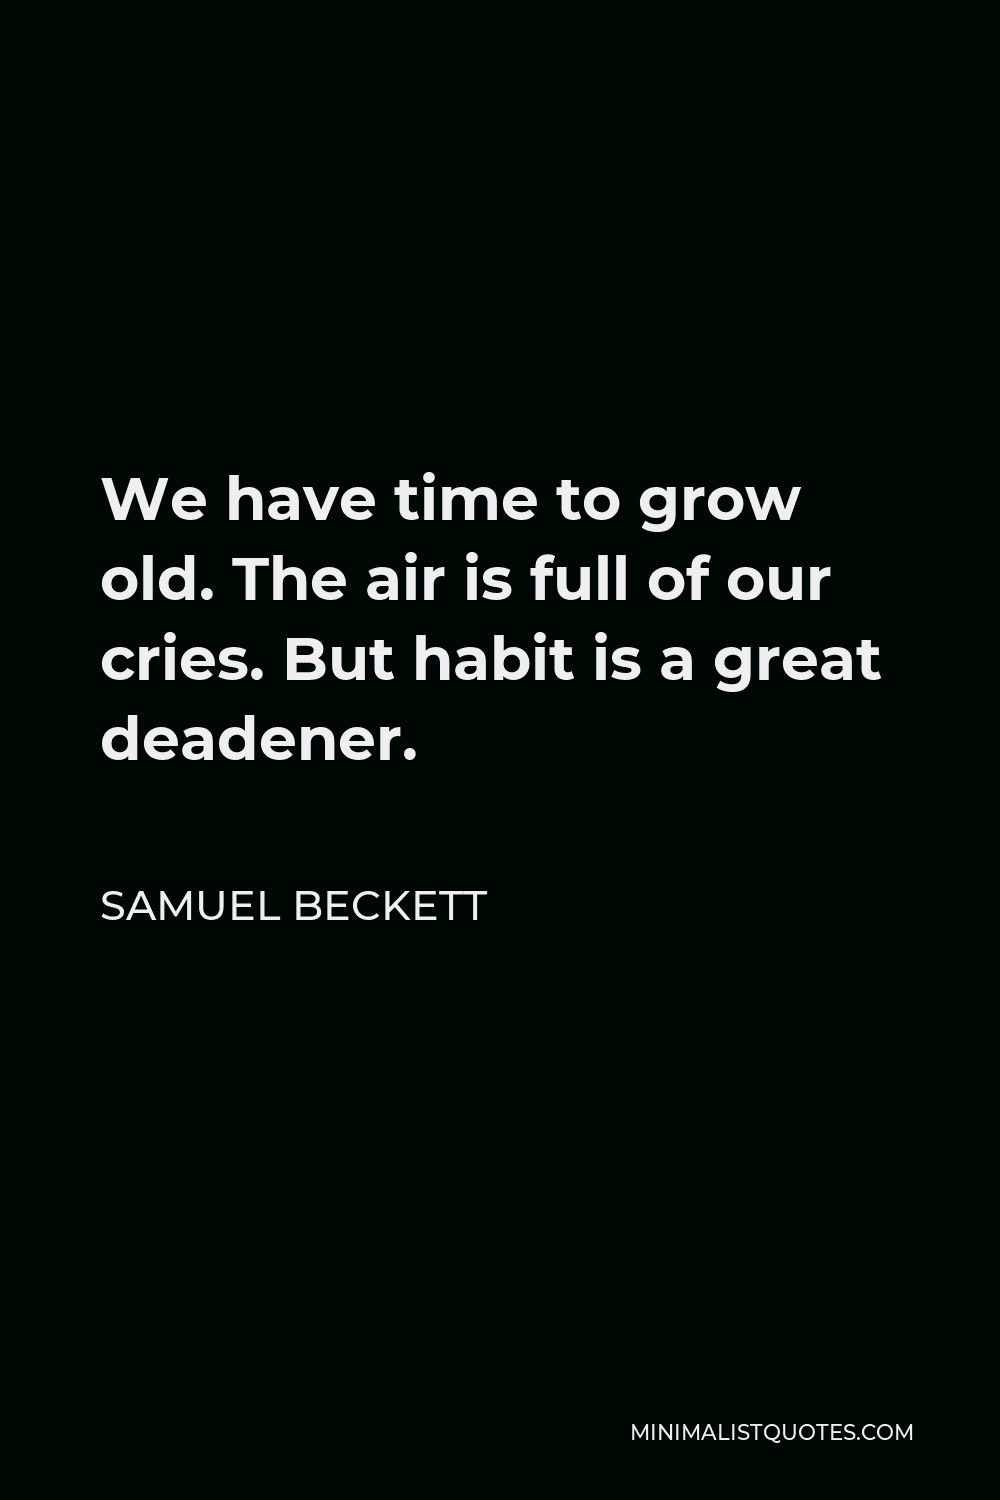 Samuel Beckett Quote - We have time to grow old. The air is full of our cries. But habit is a great deadener.